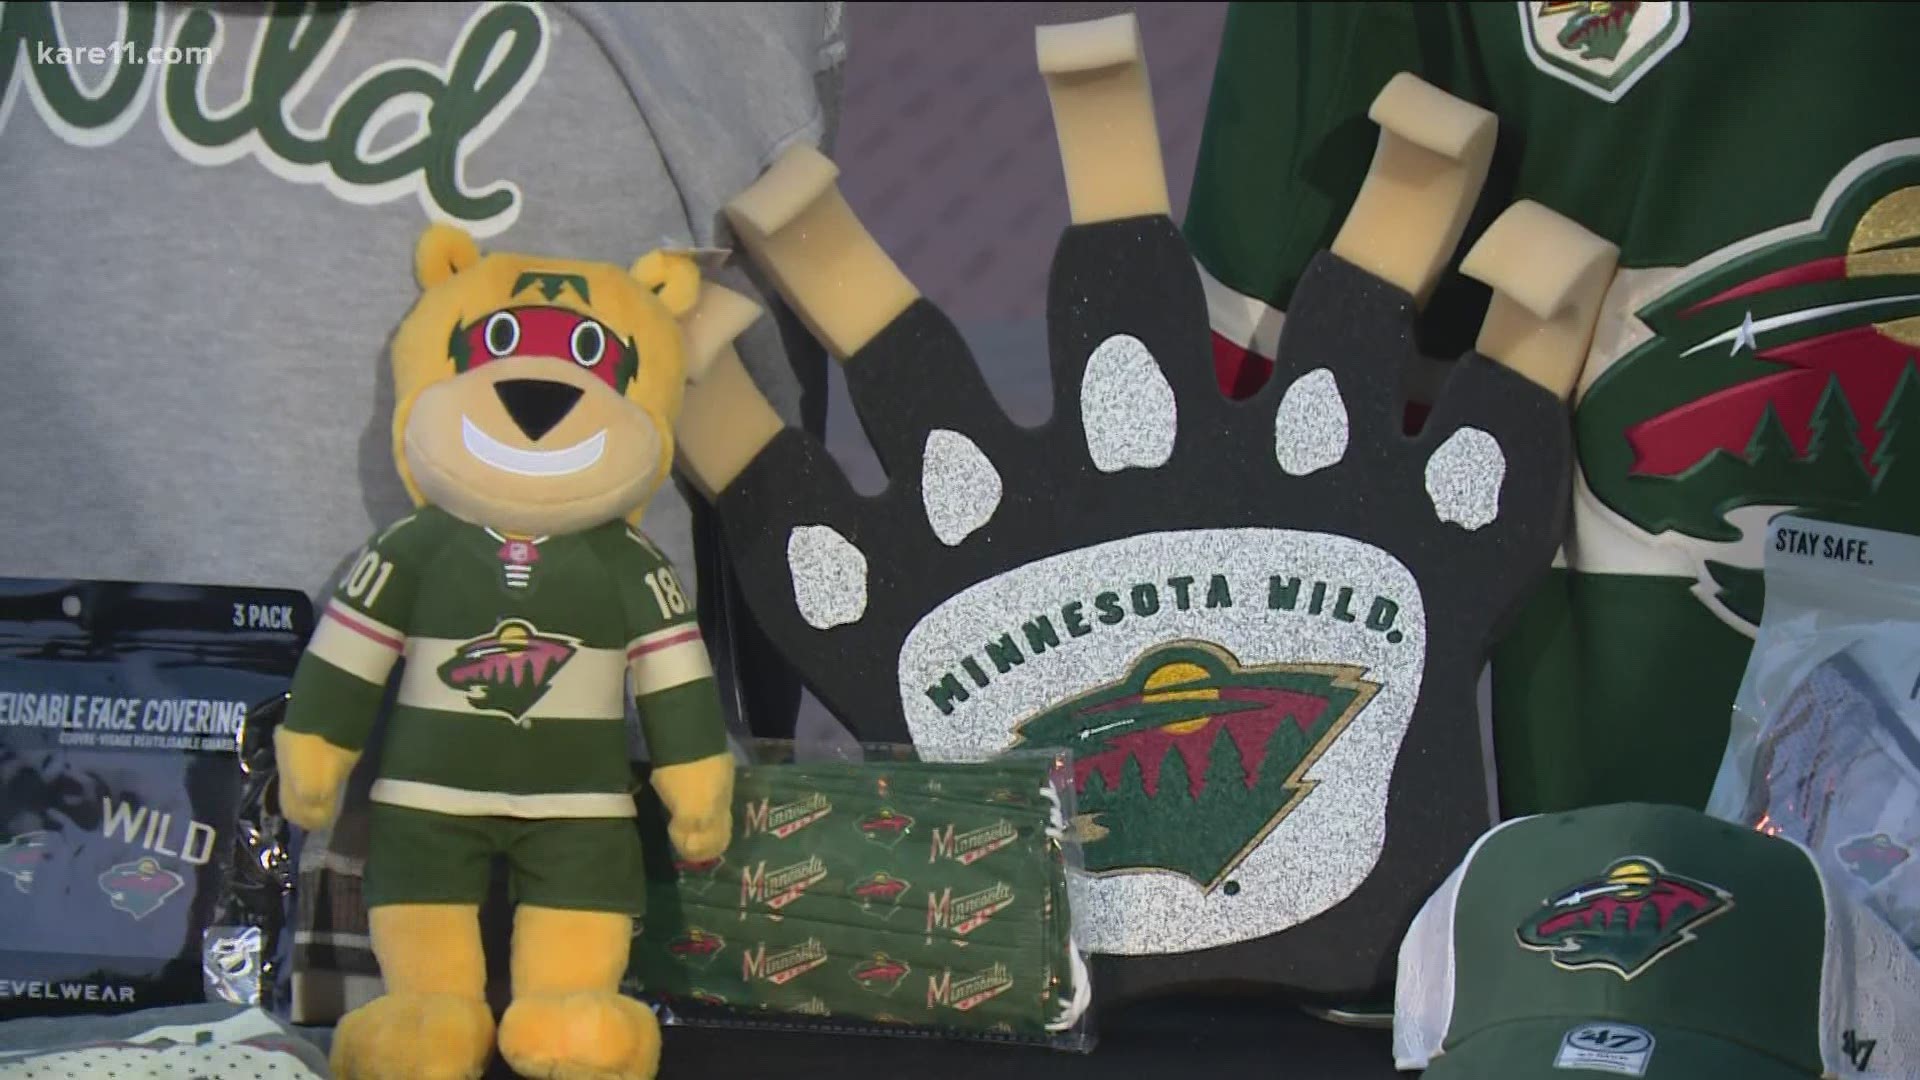 Fans can watch the Wild take on the Avalanche live and in-person on Monday night